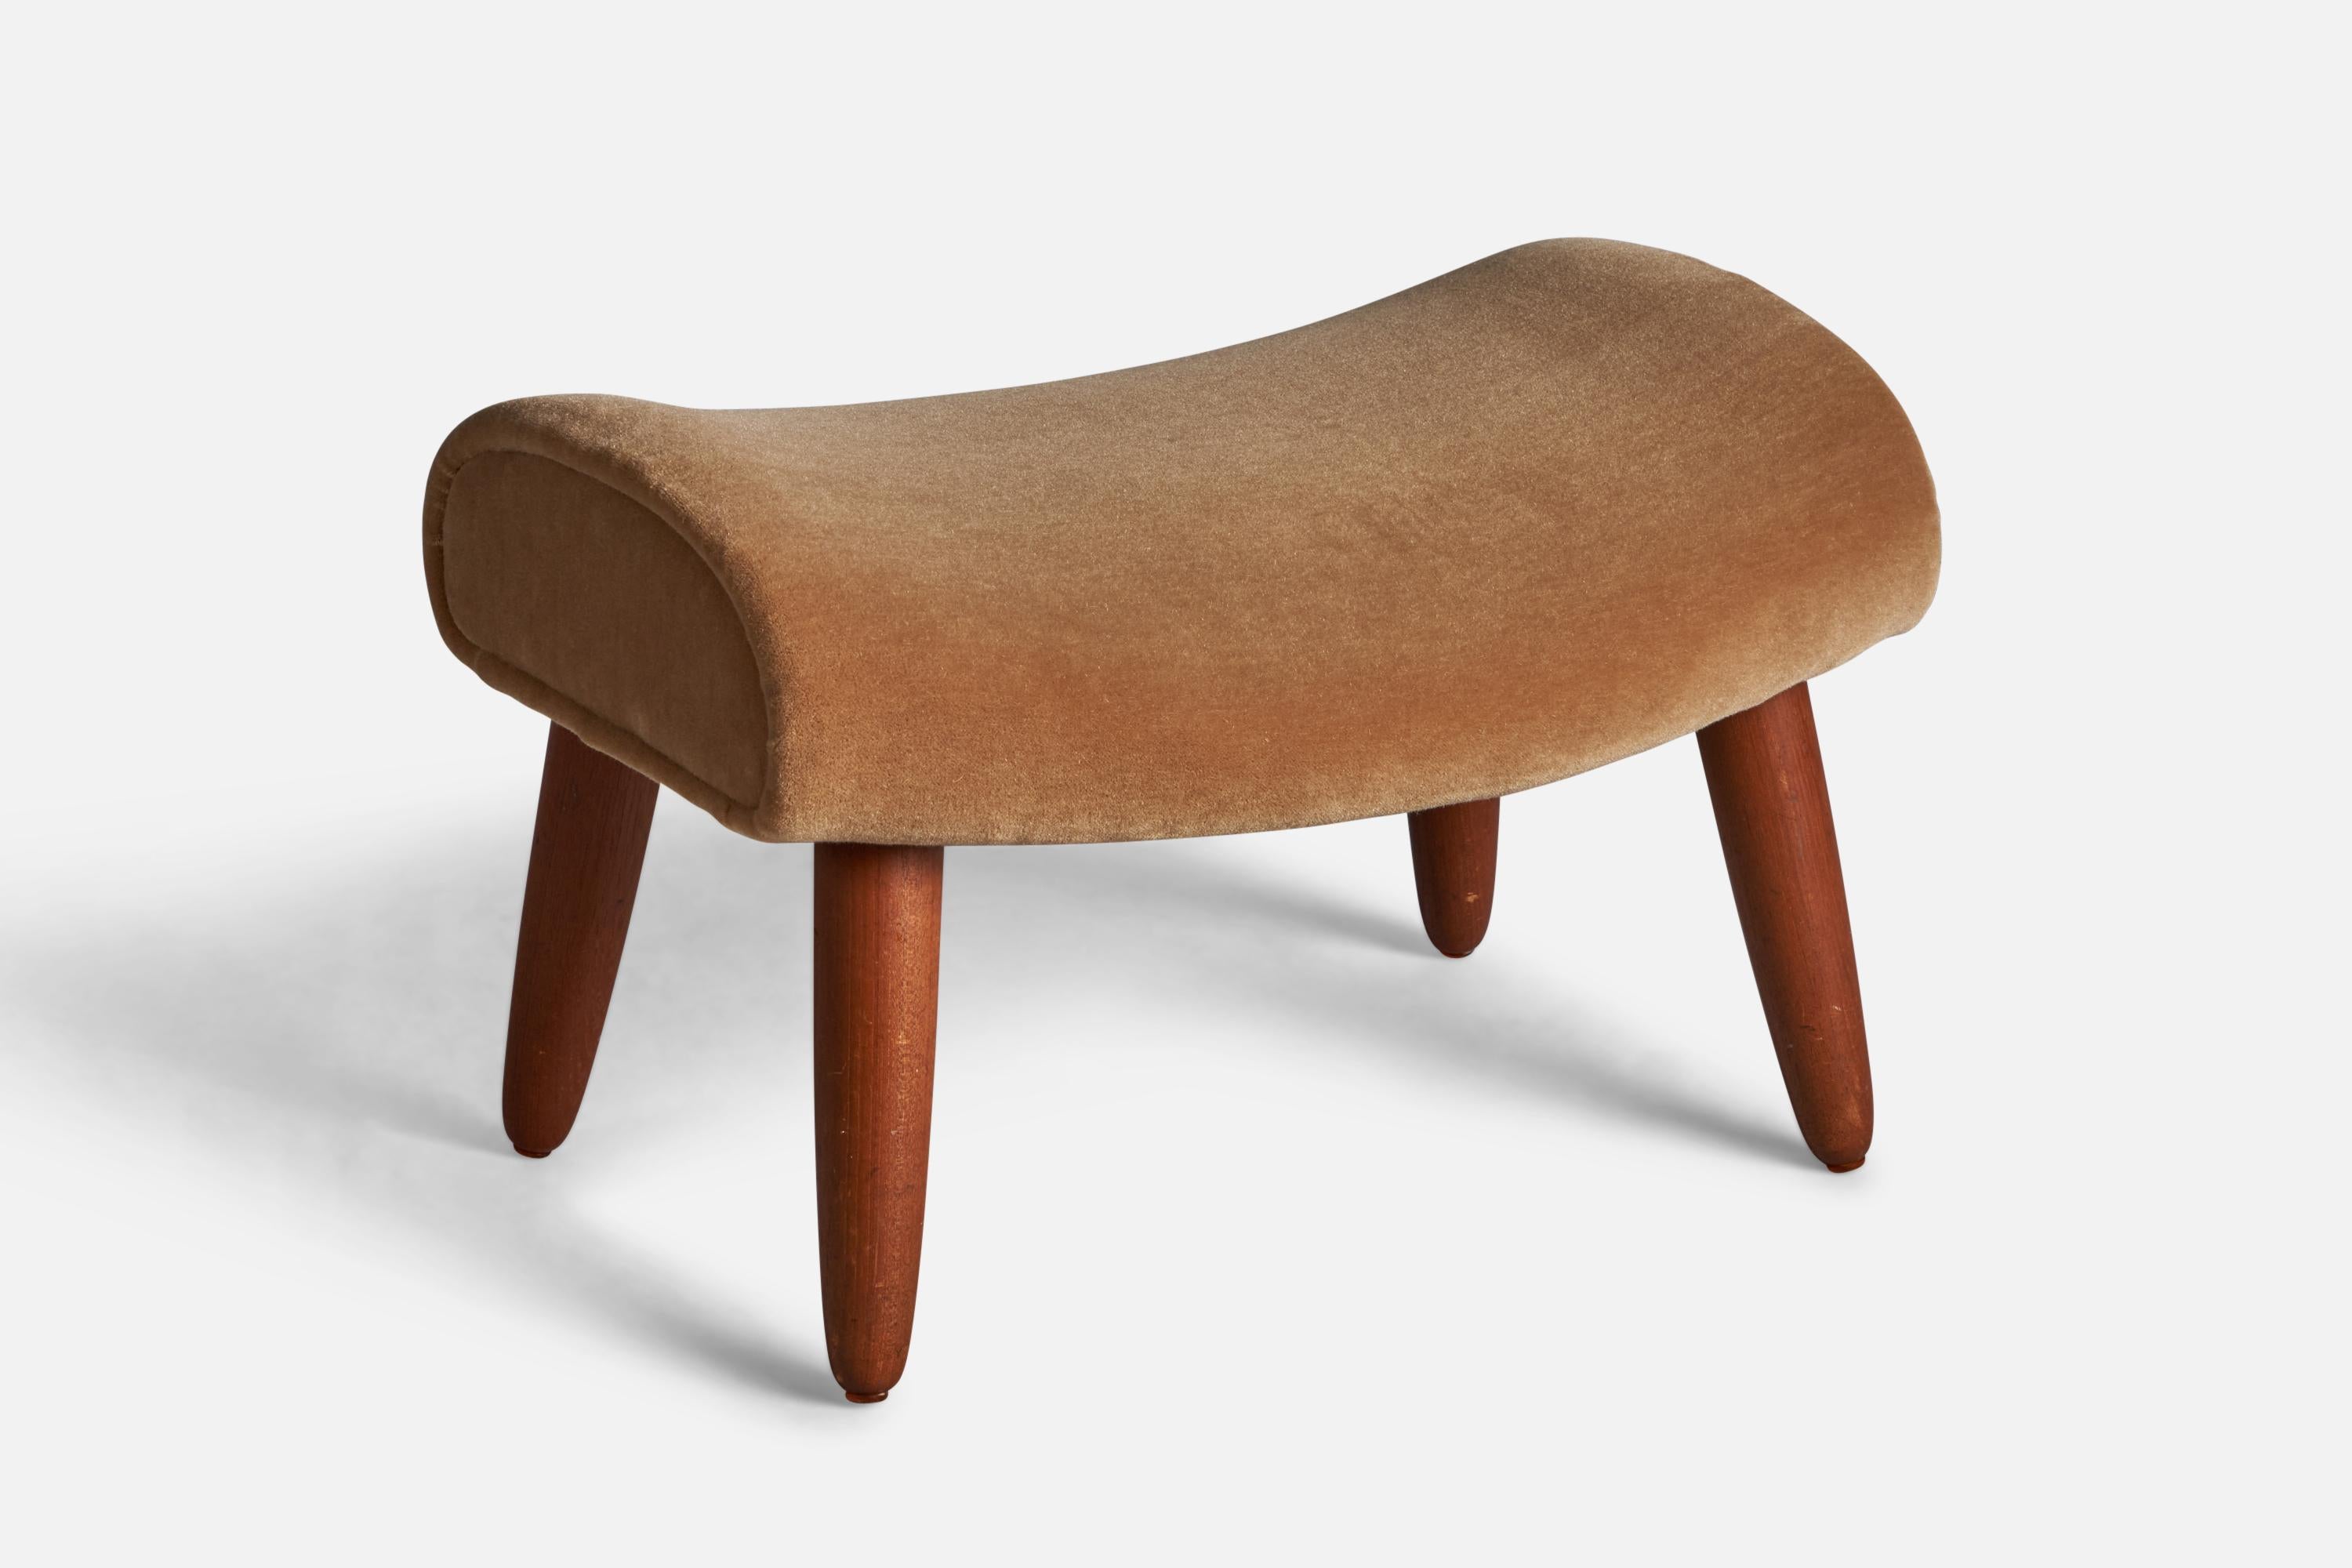 A teak and beige mohair stool, designed and produced in Denmark, 1950s.
